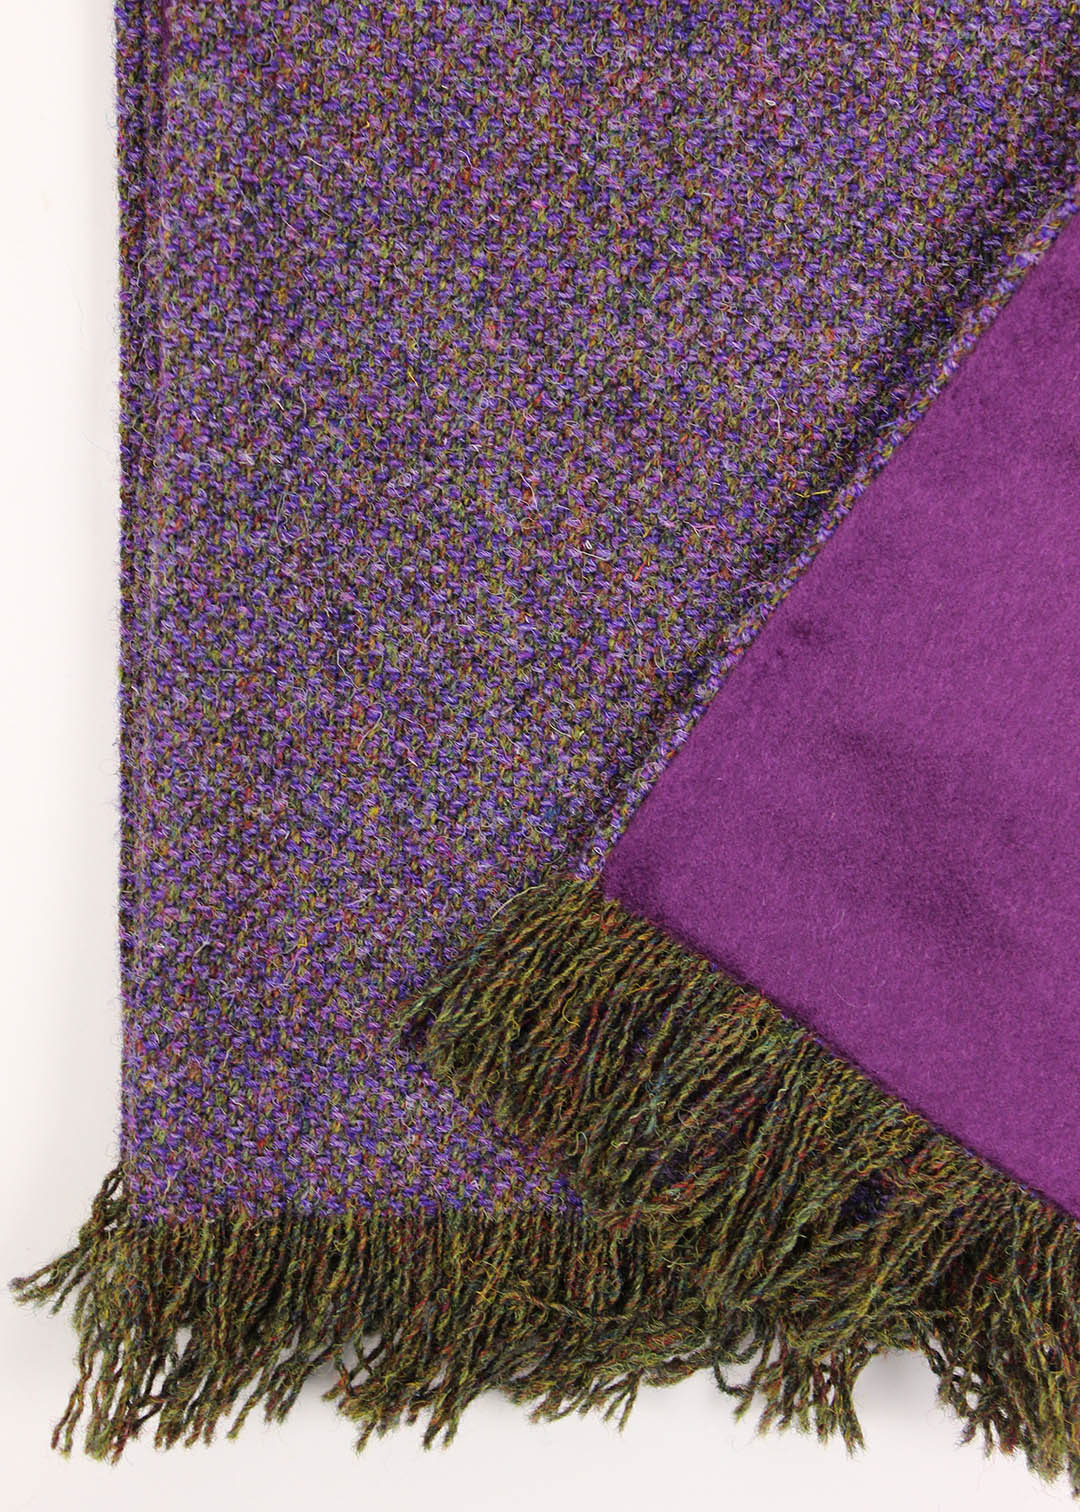 Our limited edition Harris scarf is made up of hand woven tweed in a myriad of purple hues like Scottish heather, paired with a soft cashmere reverse in deep purple.